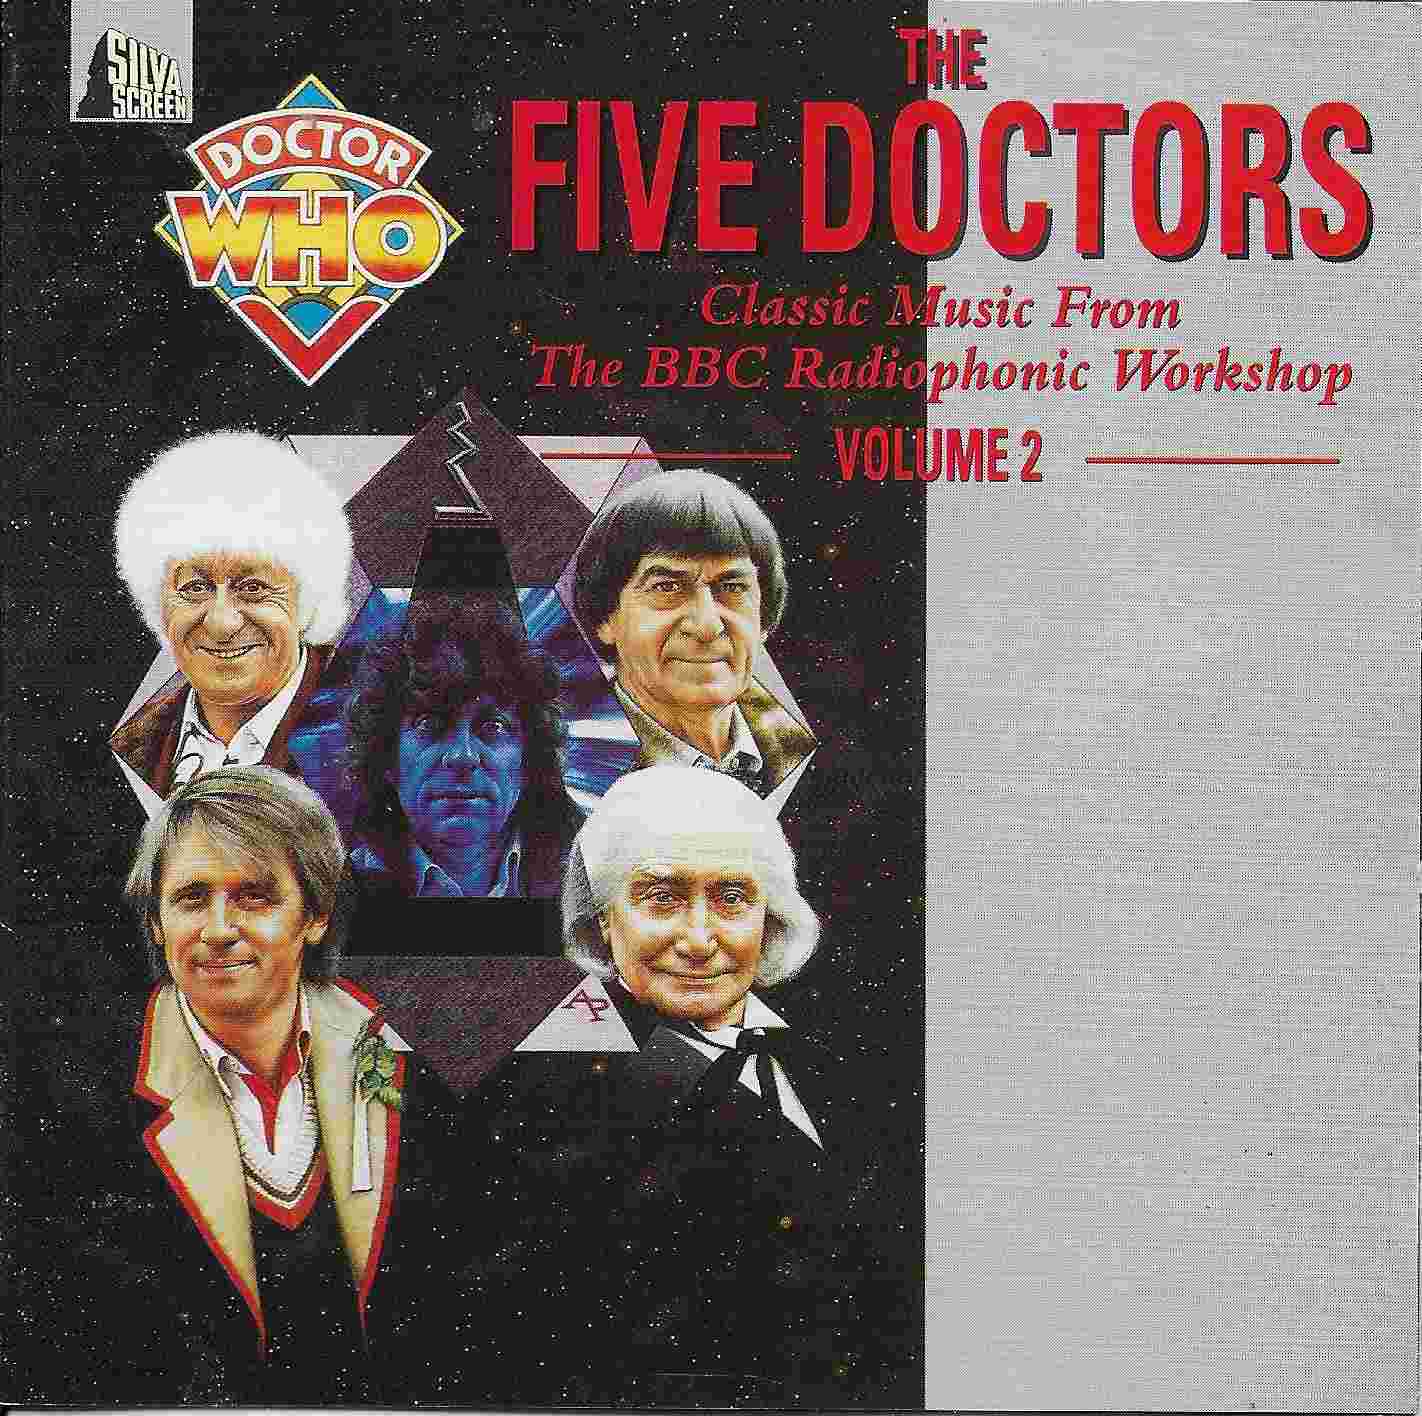 Picture of FILMCD 710 The five doctors - Doctor who the music - Volume 2 by artist Various from the BBC records and Tapes library